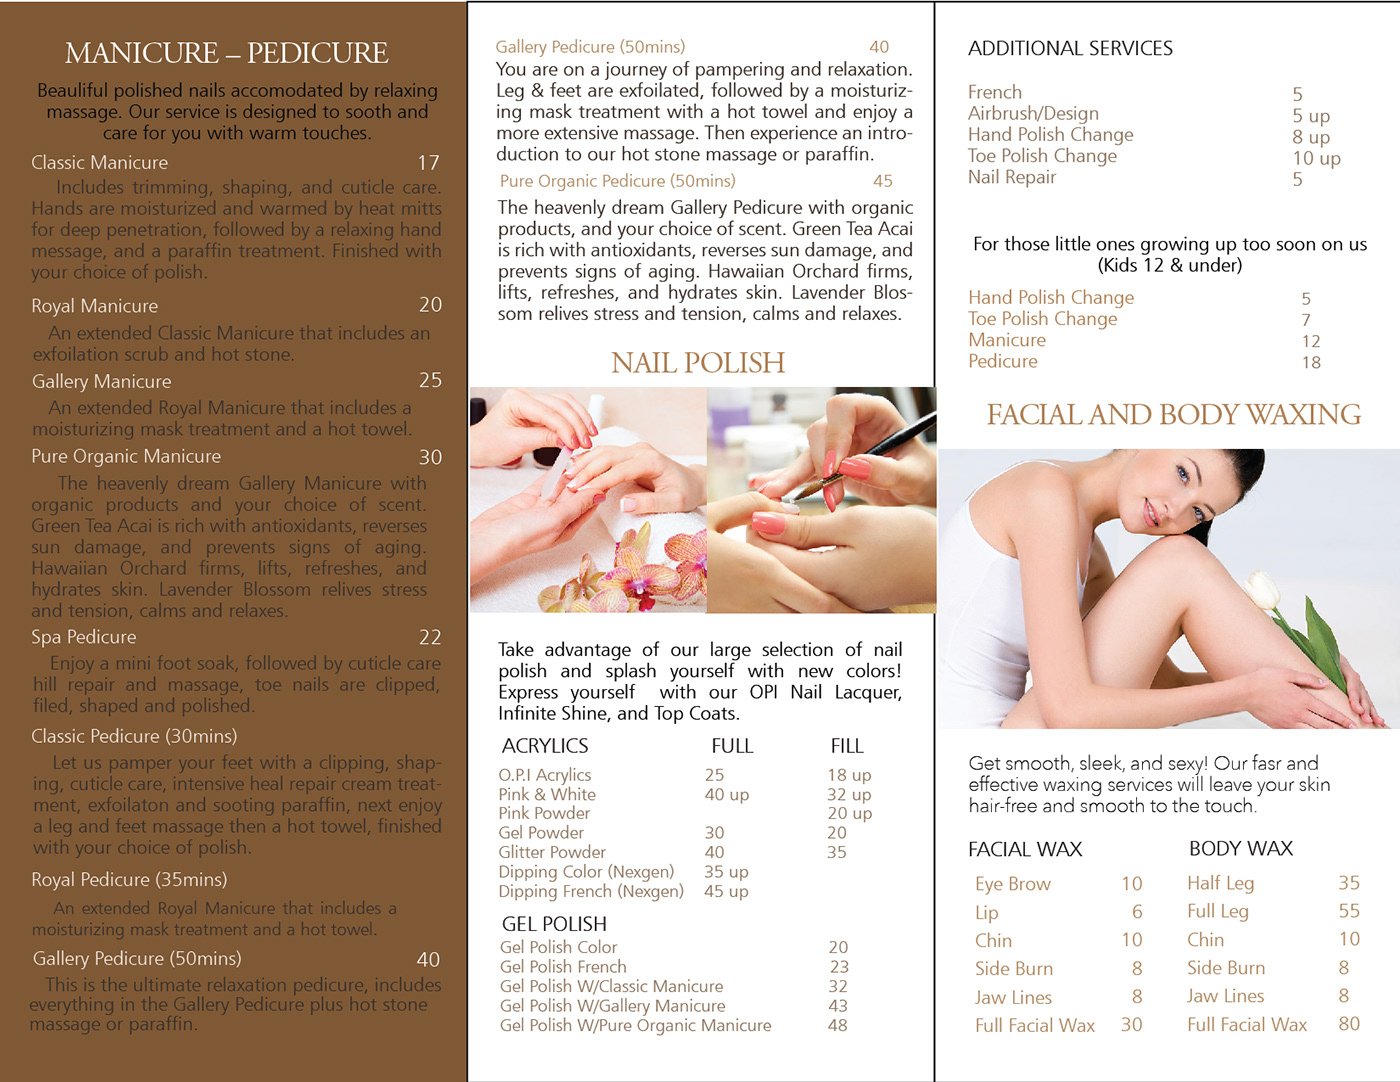 bussiness card flyer marketing   Advertising  nails beauty advertisement brocure nail Clasical design